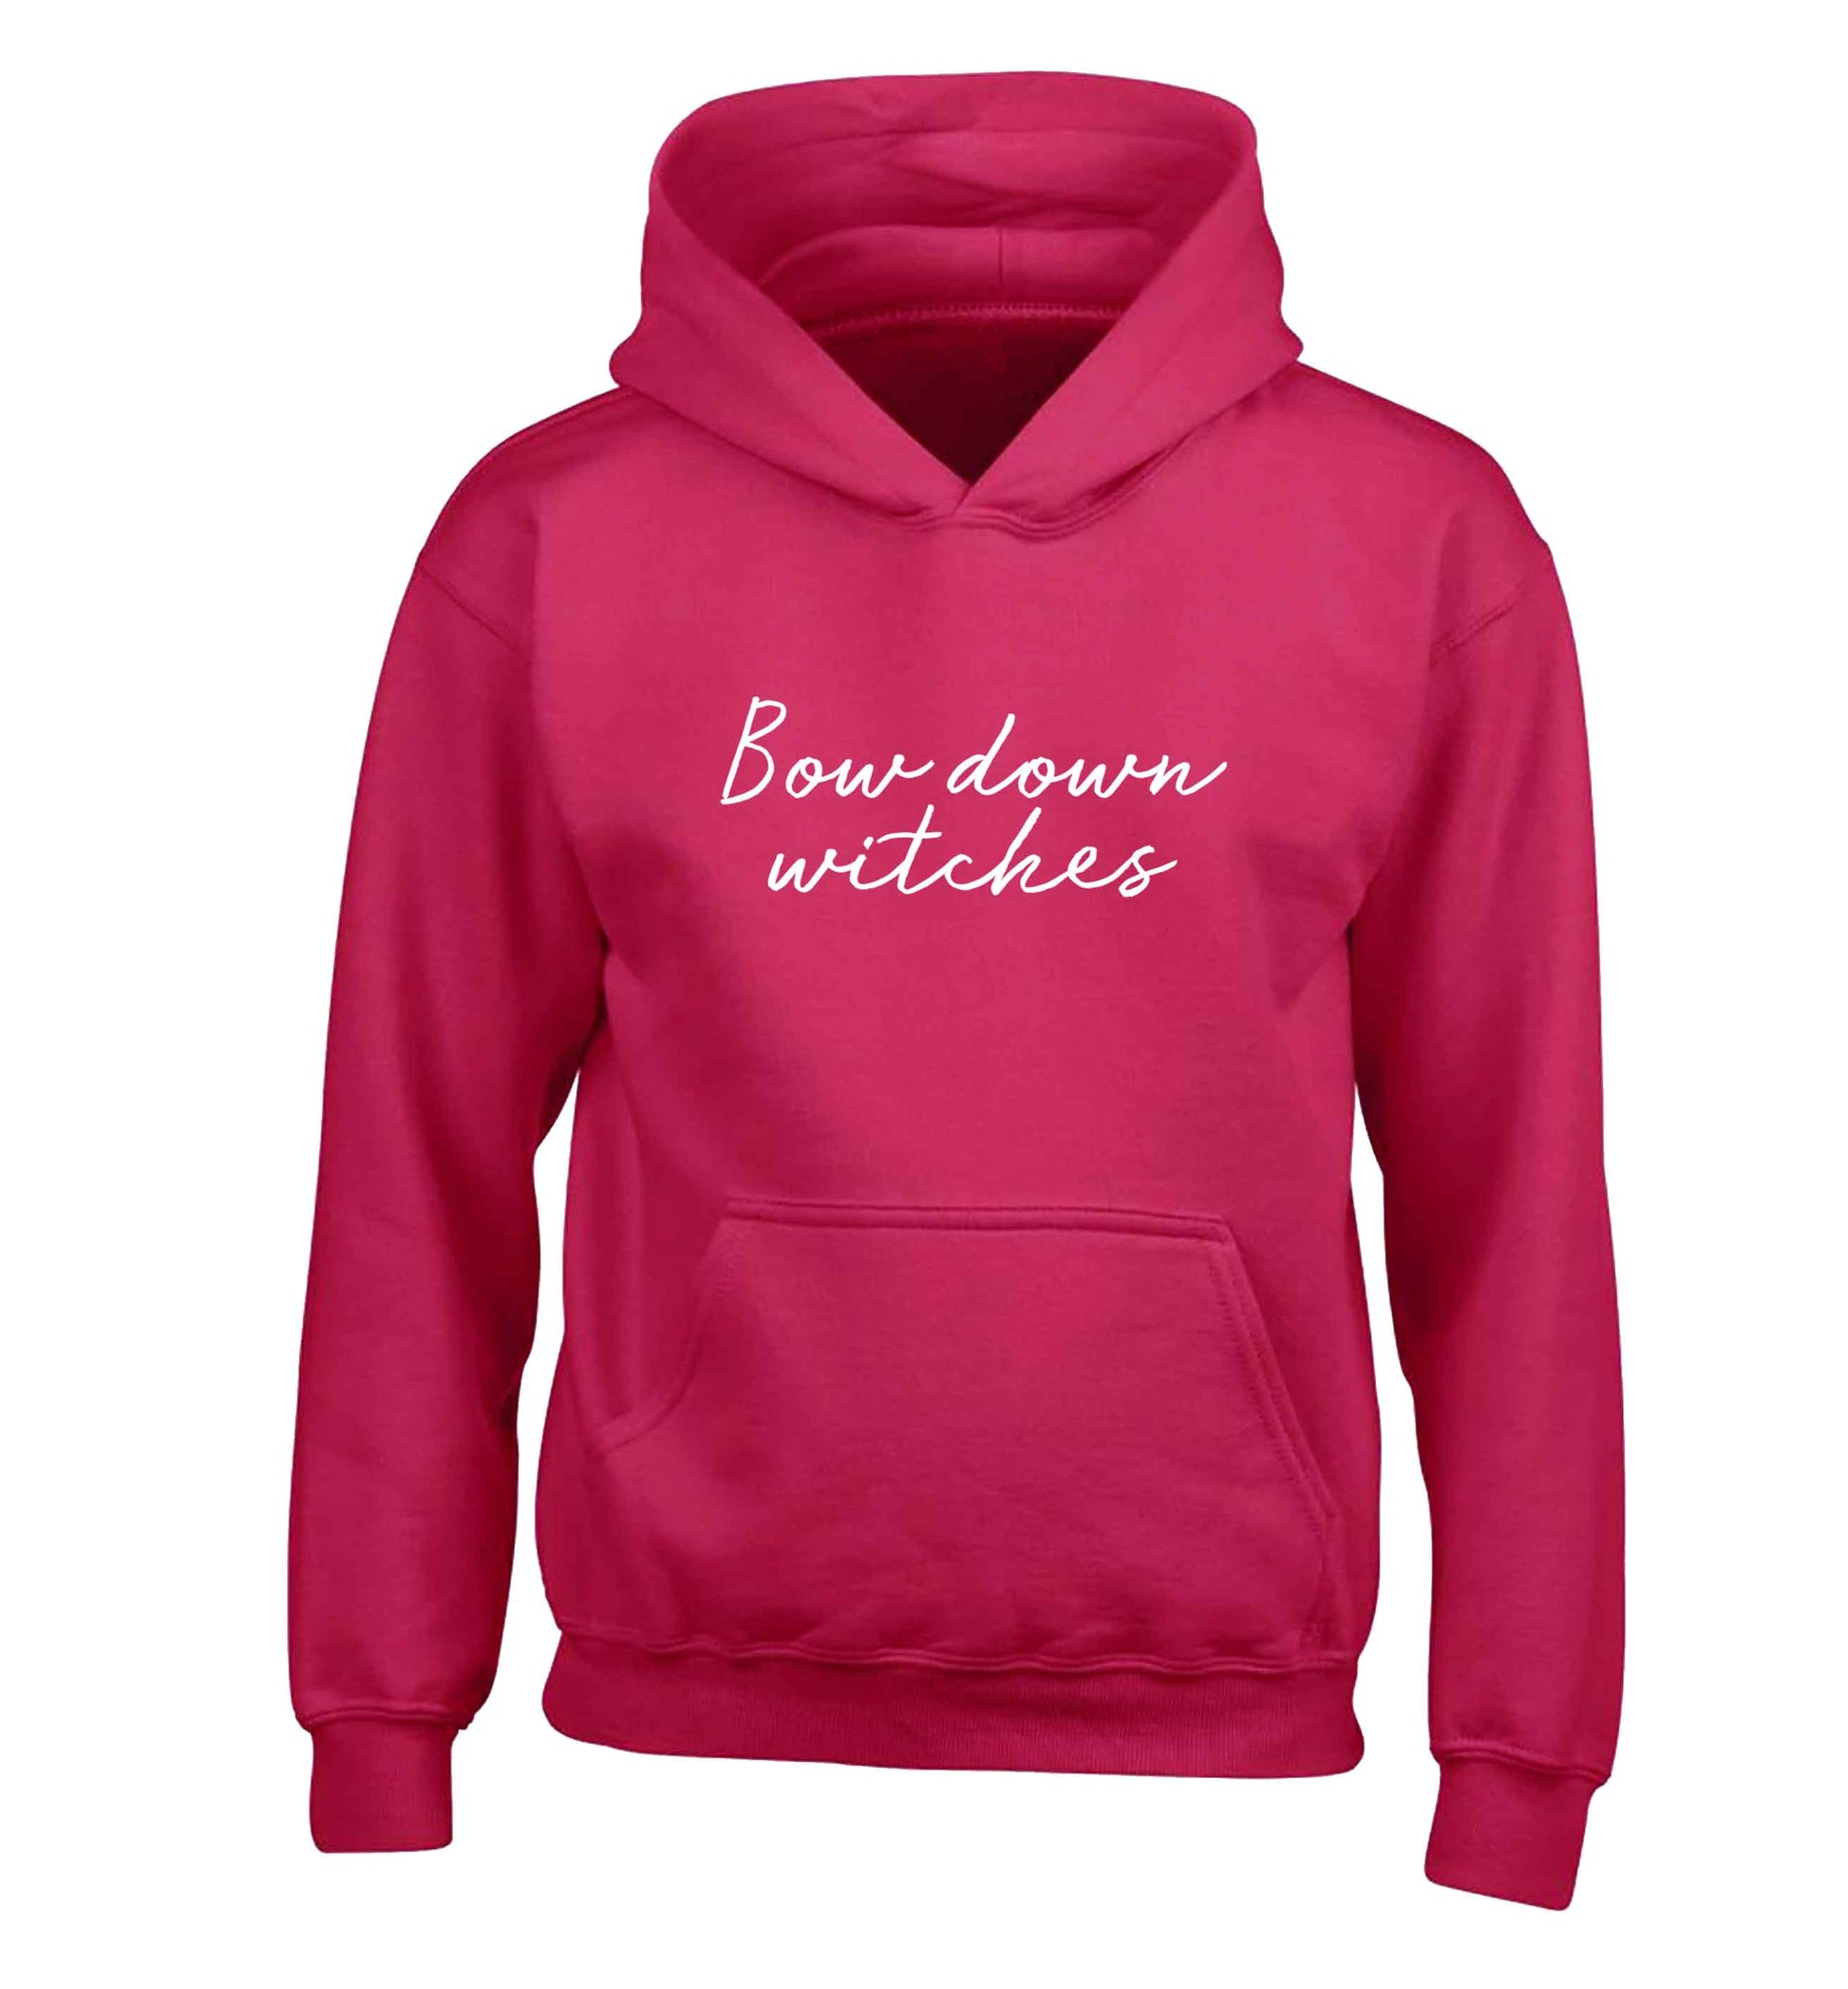 Bow down witches children's pink hoodie 12-13 Years